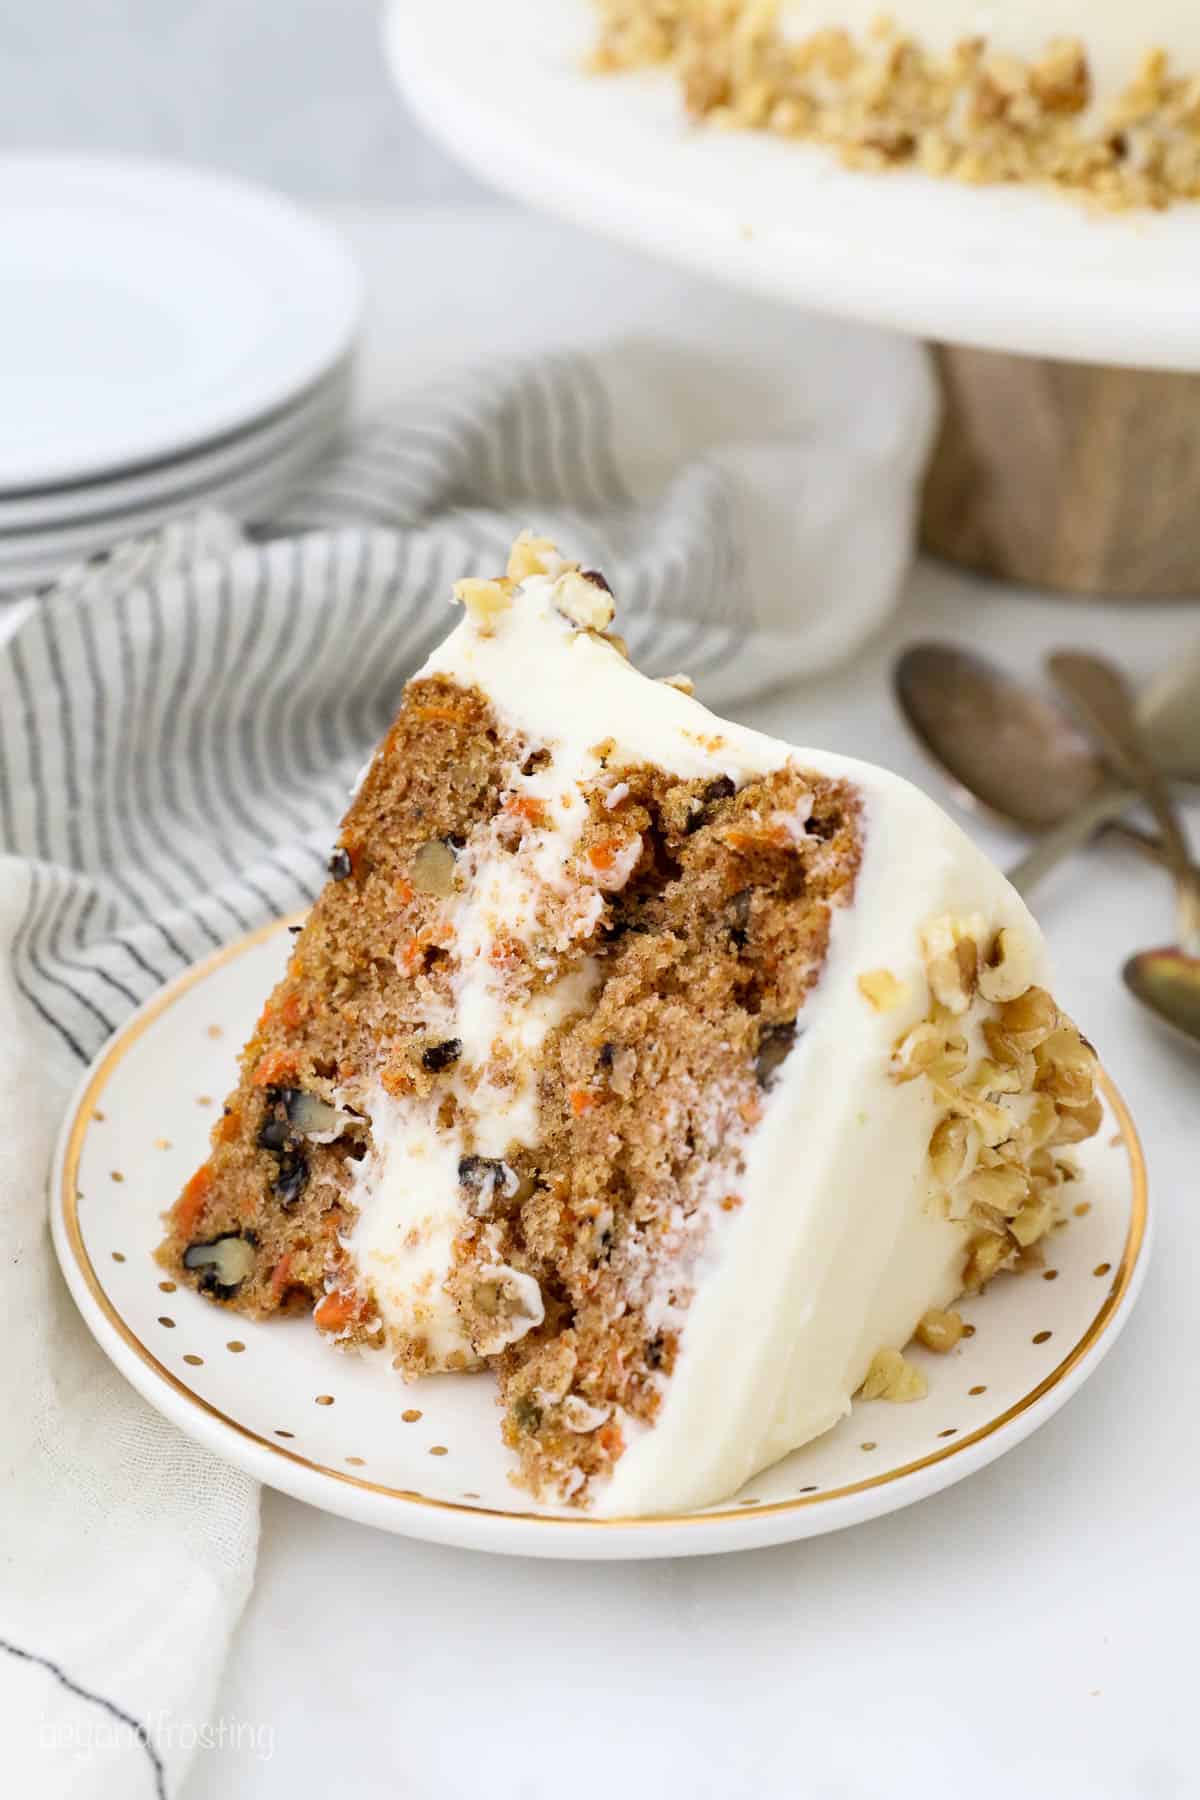 A thick slice of carrot cake on a gold polka dot plate